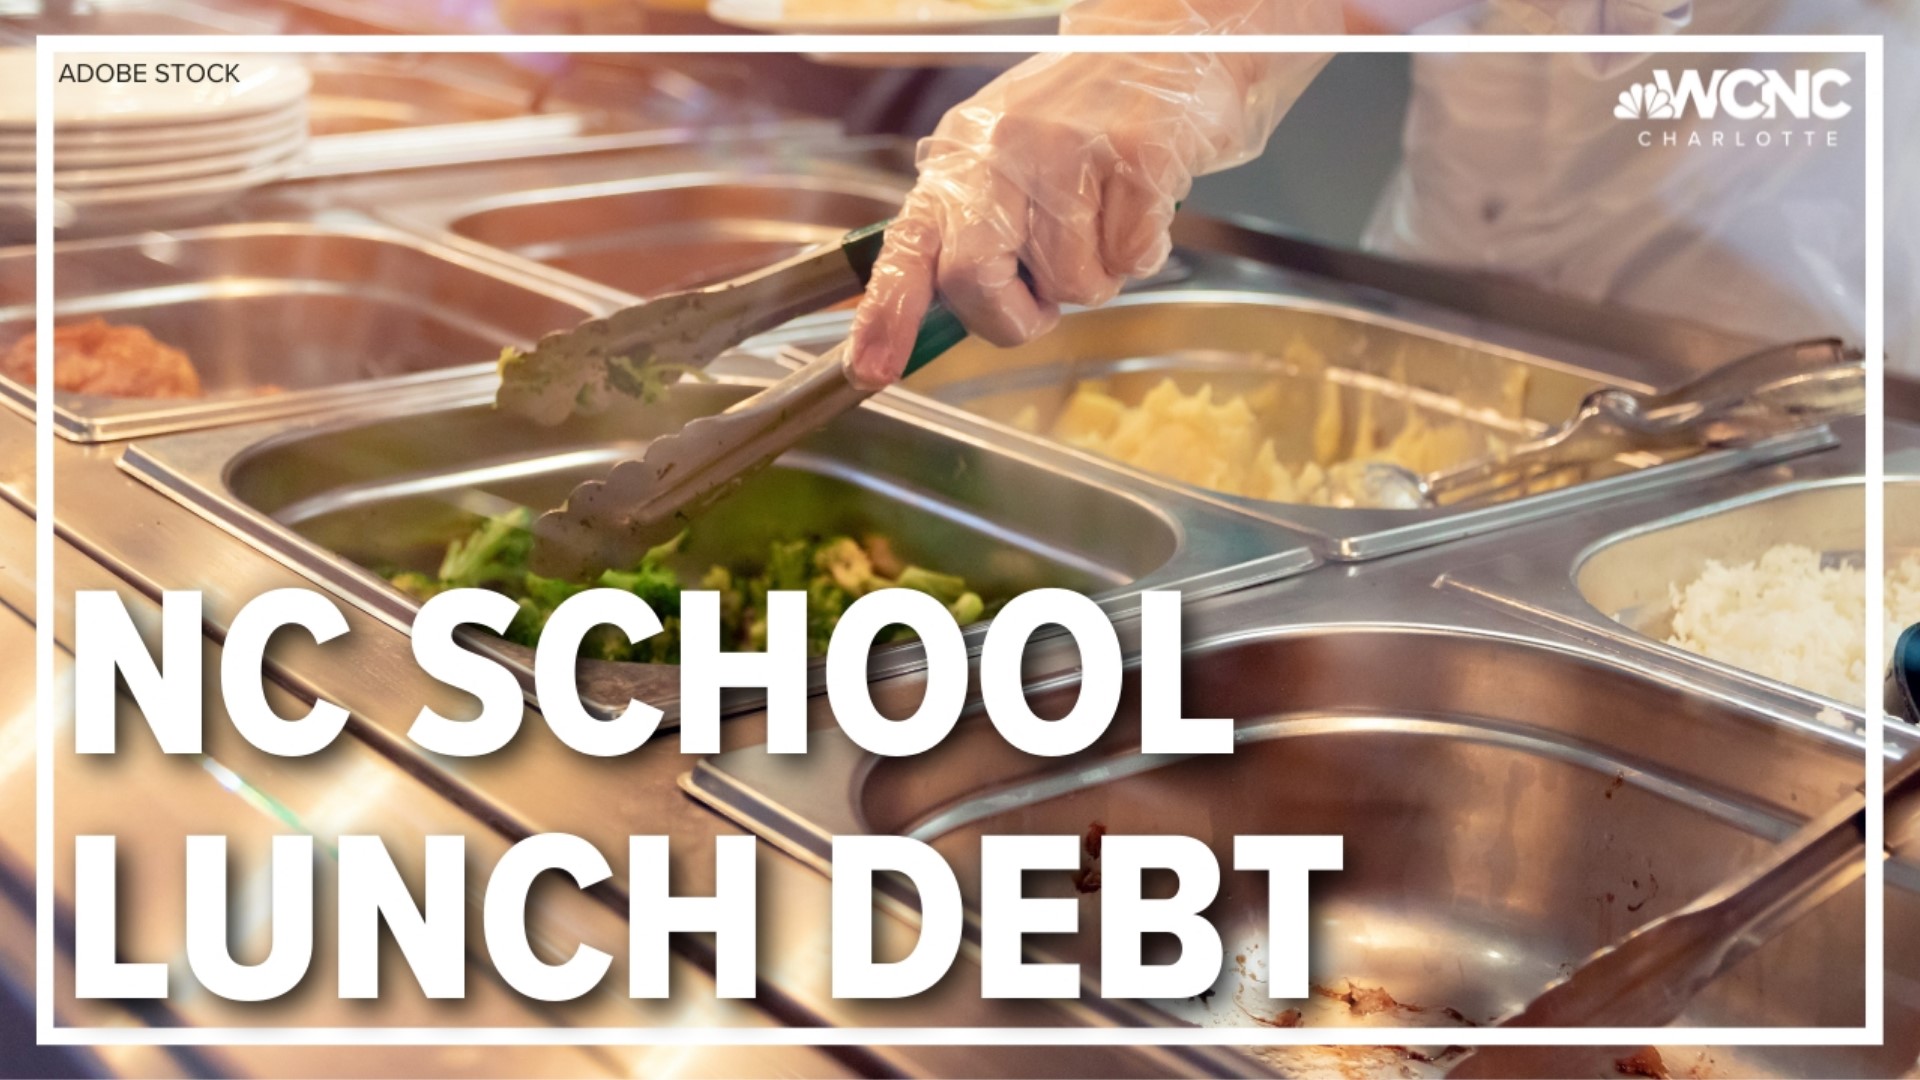 In North Carolina, school lunch debt has topped more than $1 million in just the first few months of school.